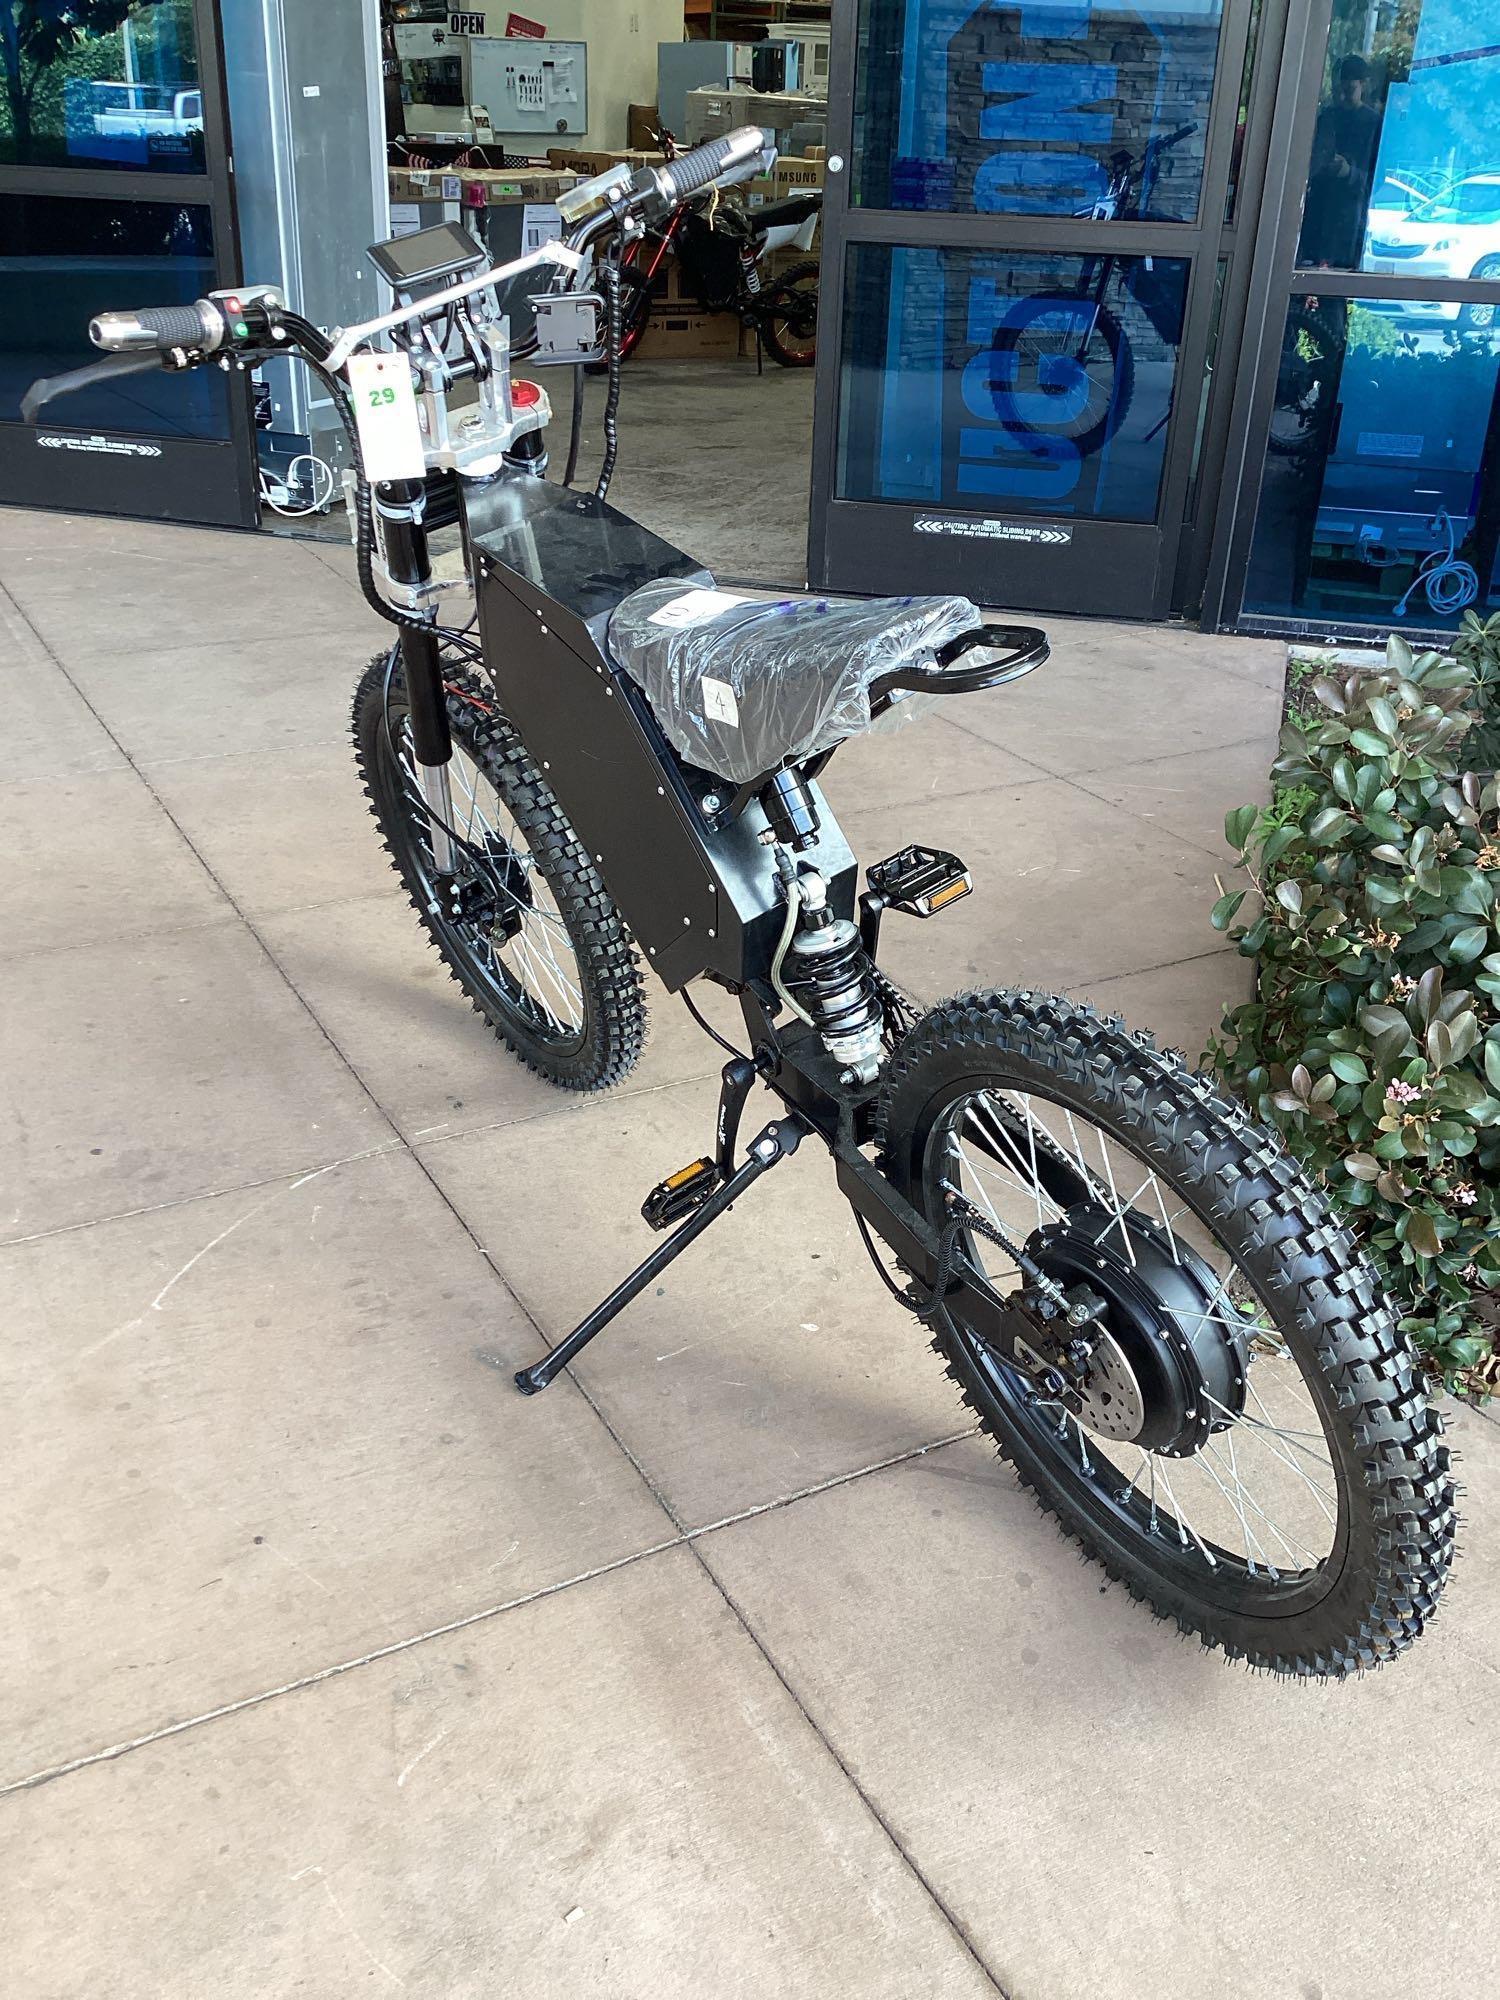 3000w 48v Adult Stealth Bomber Enduro Electric Off Road Bike*NO CHARGER*